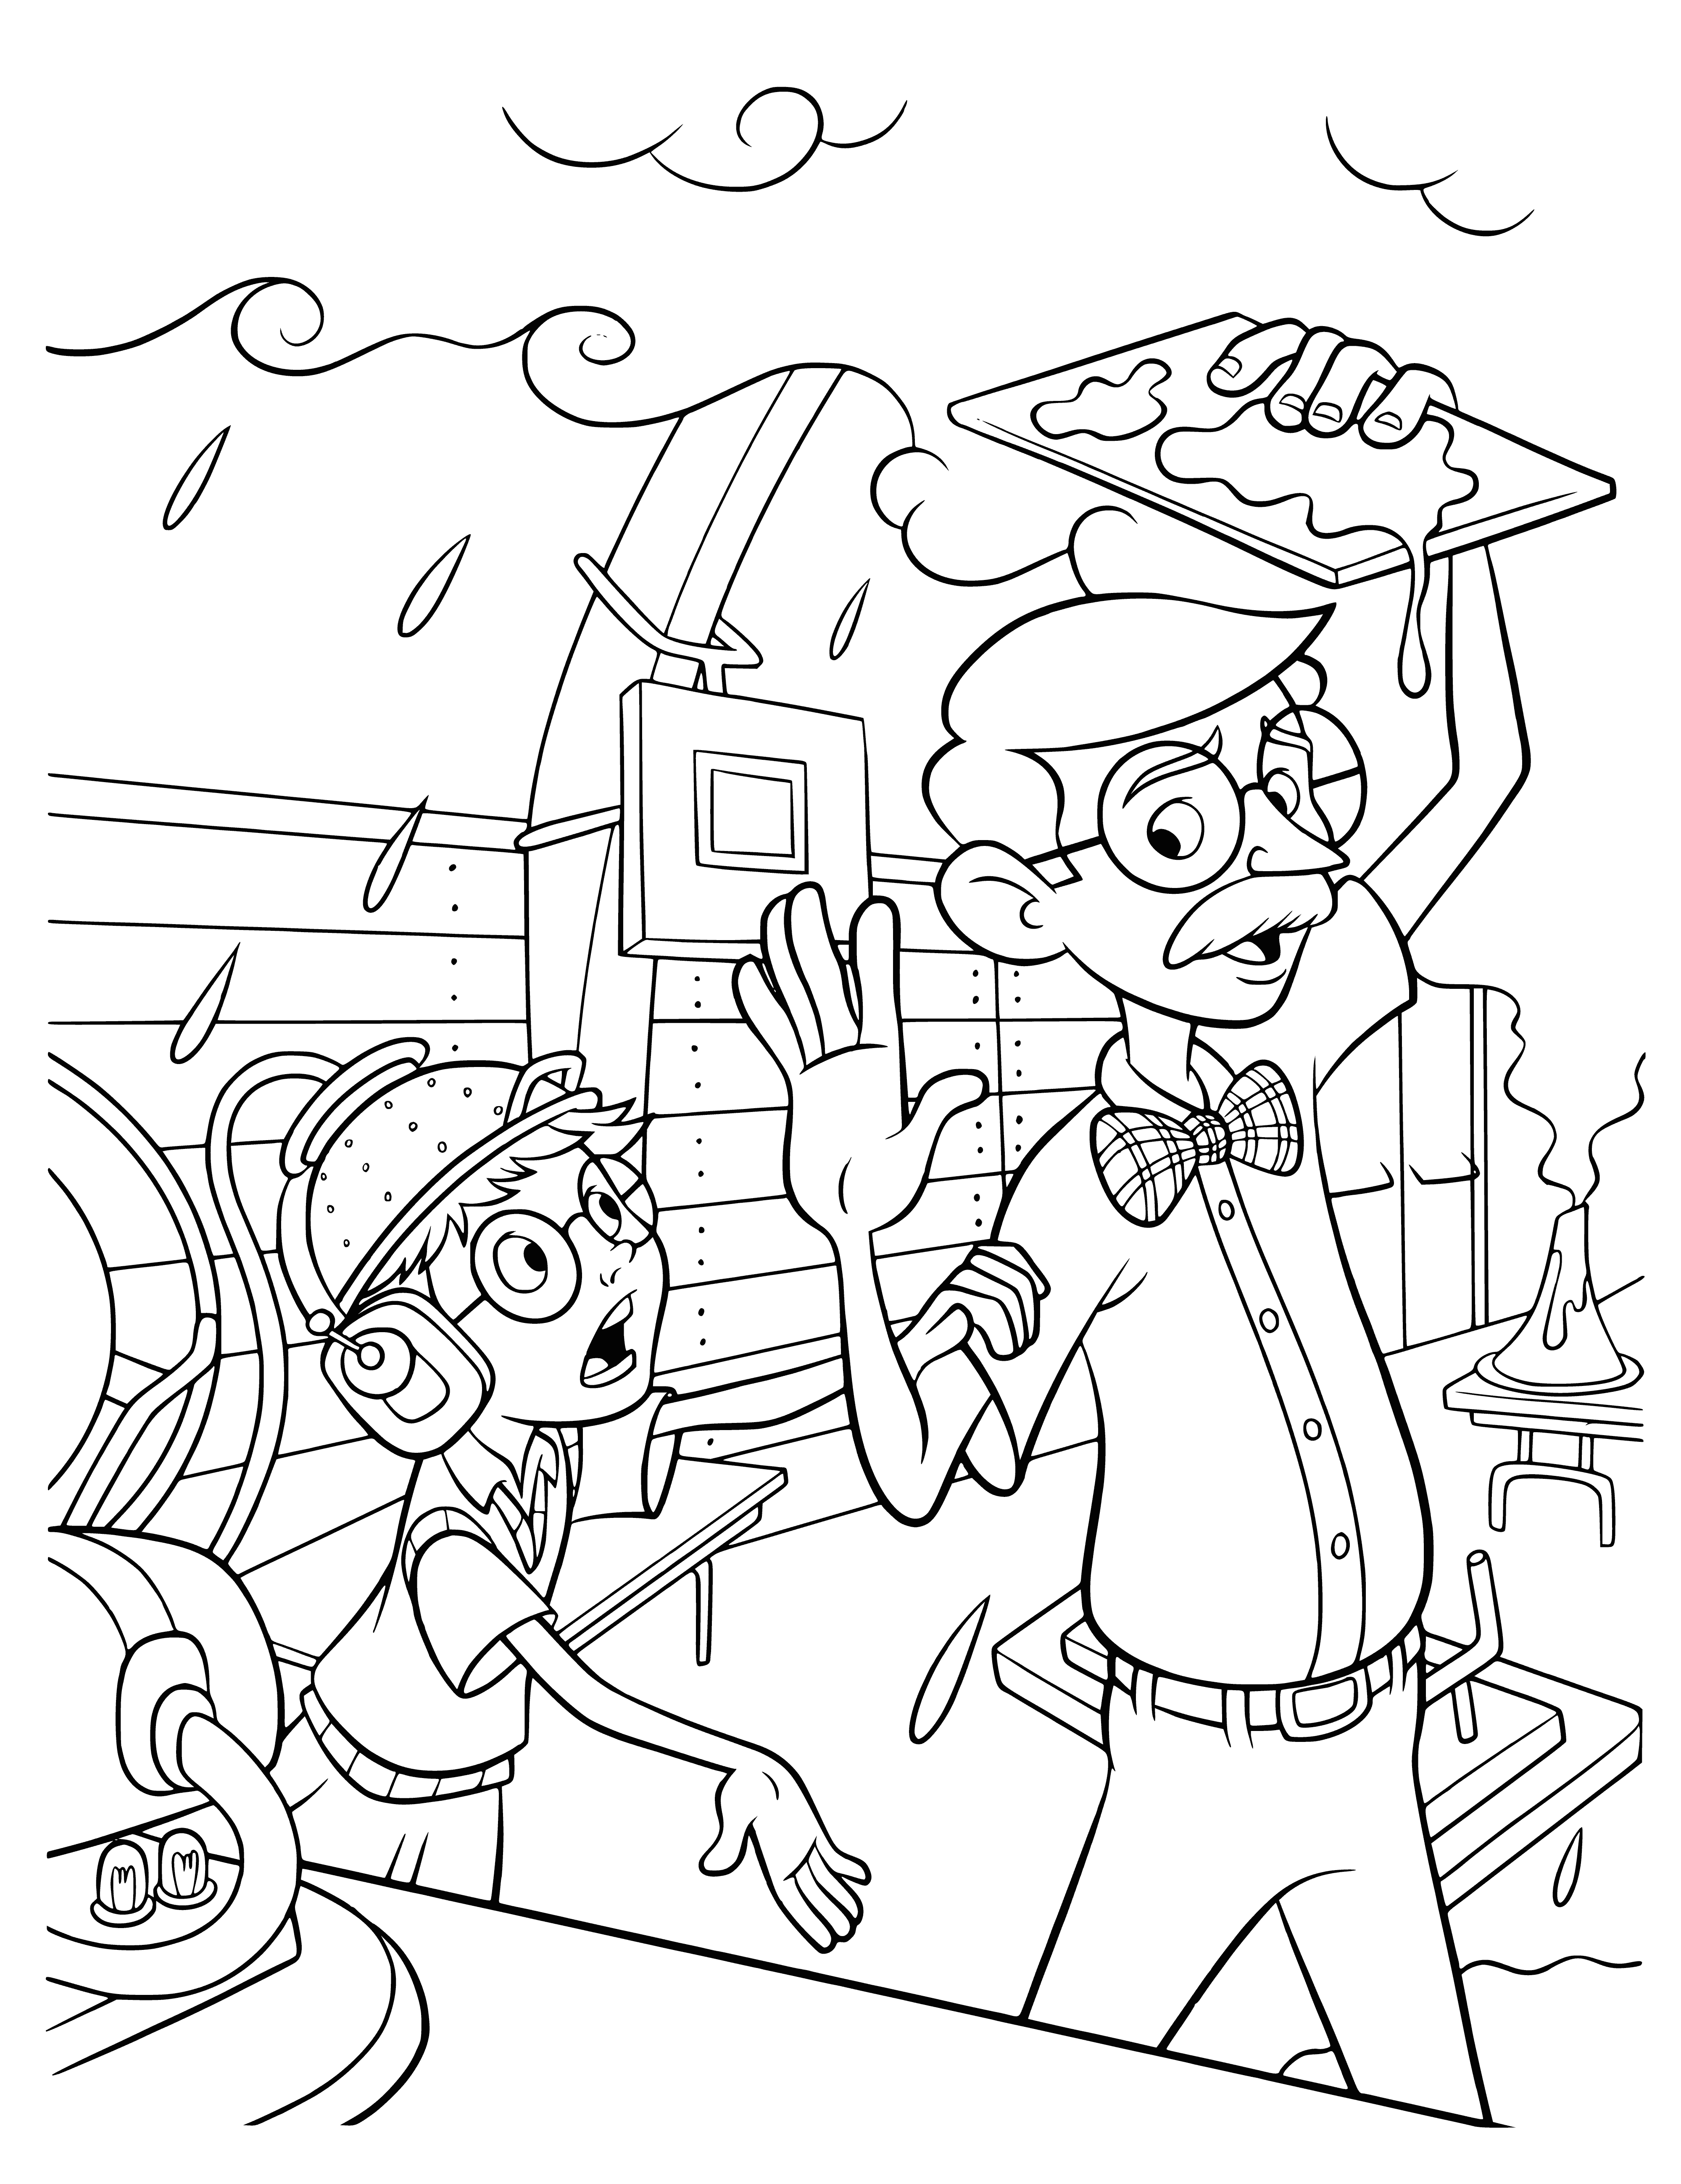 School inventions coloring page